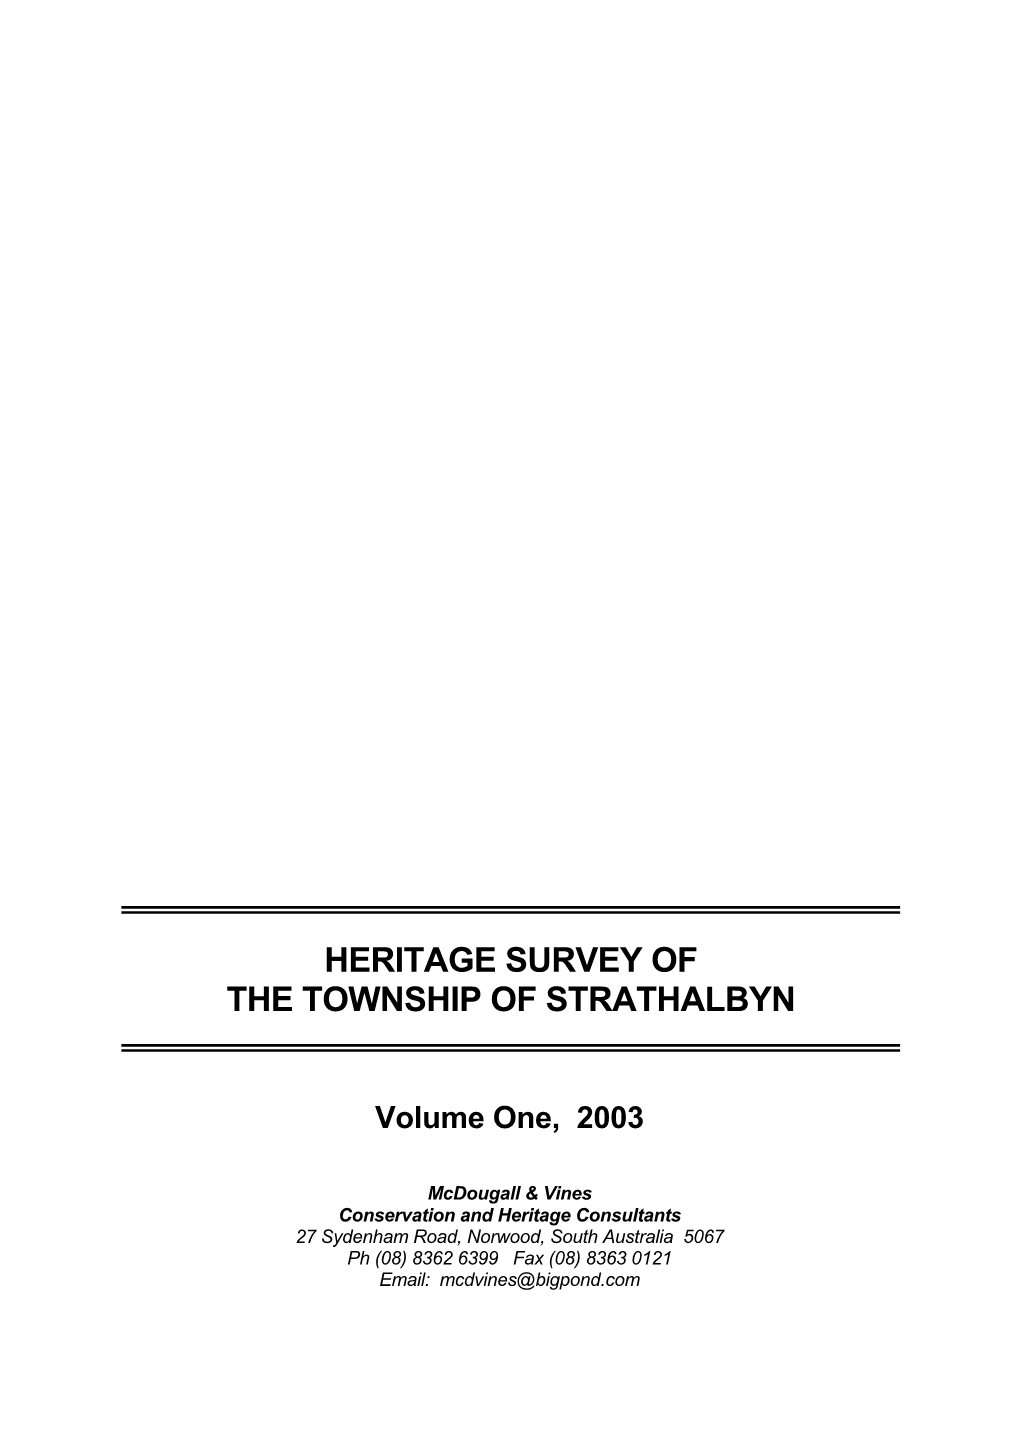 Heritage Survey of the Township of Strathalbyn